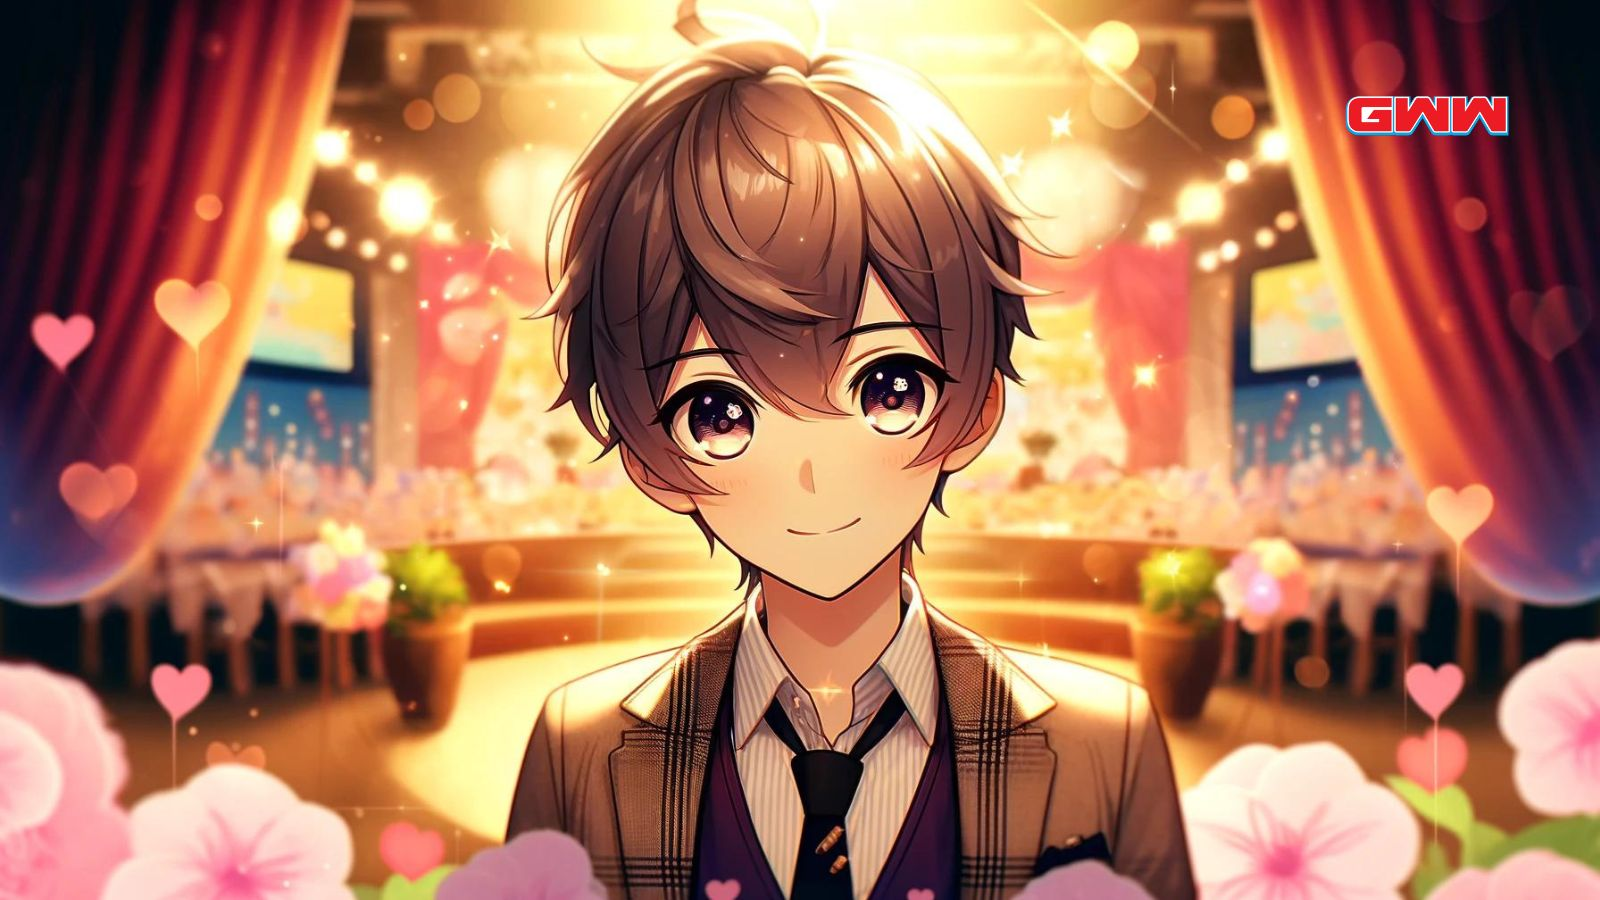 Anime boy with bright eyes and smile in a spotlight, background blurred